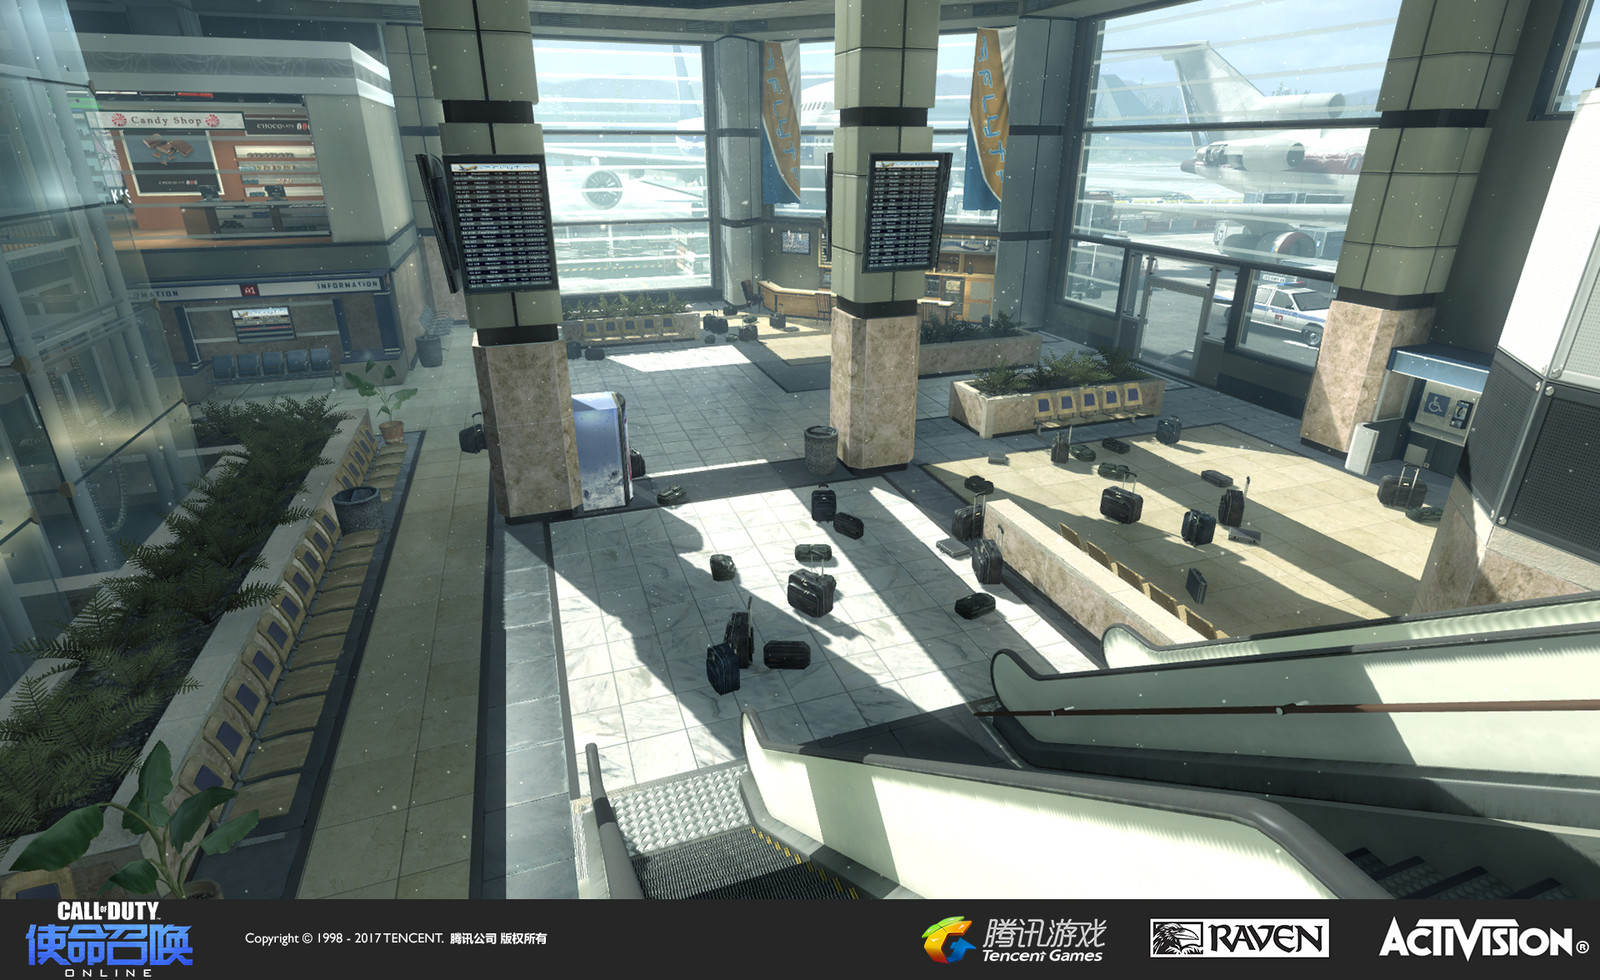 Terminal: A re-creation of the muliplayer map in Modern Warfare 2. I recreated the floor, color scheme, and set dress in this area.